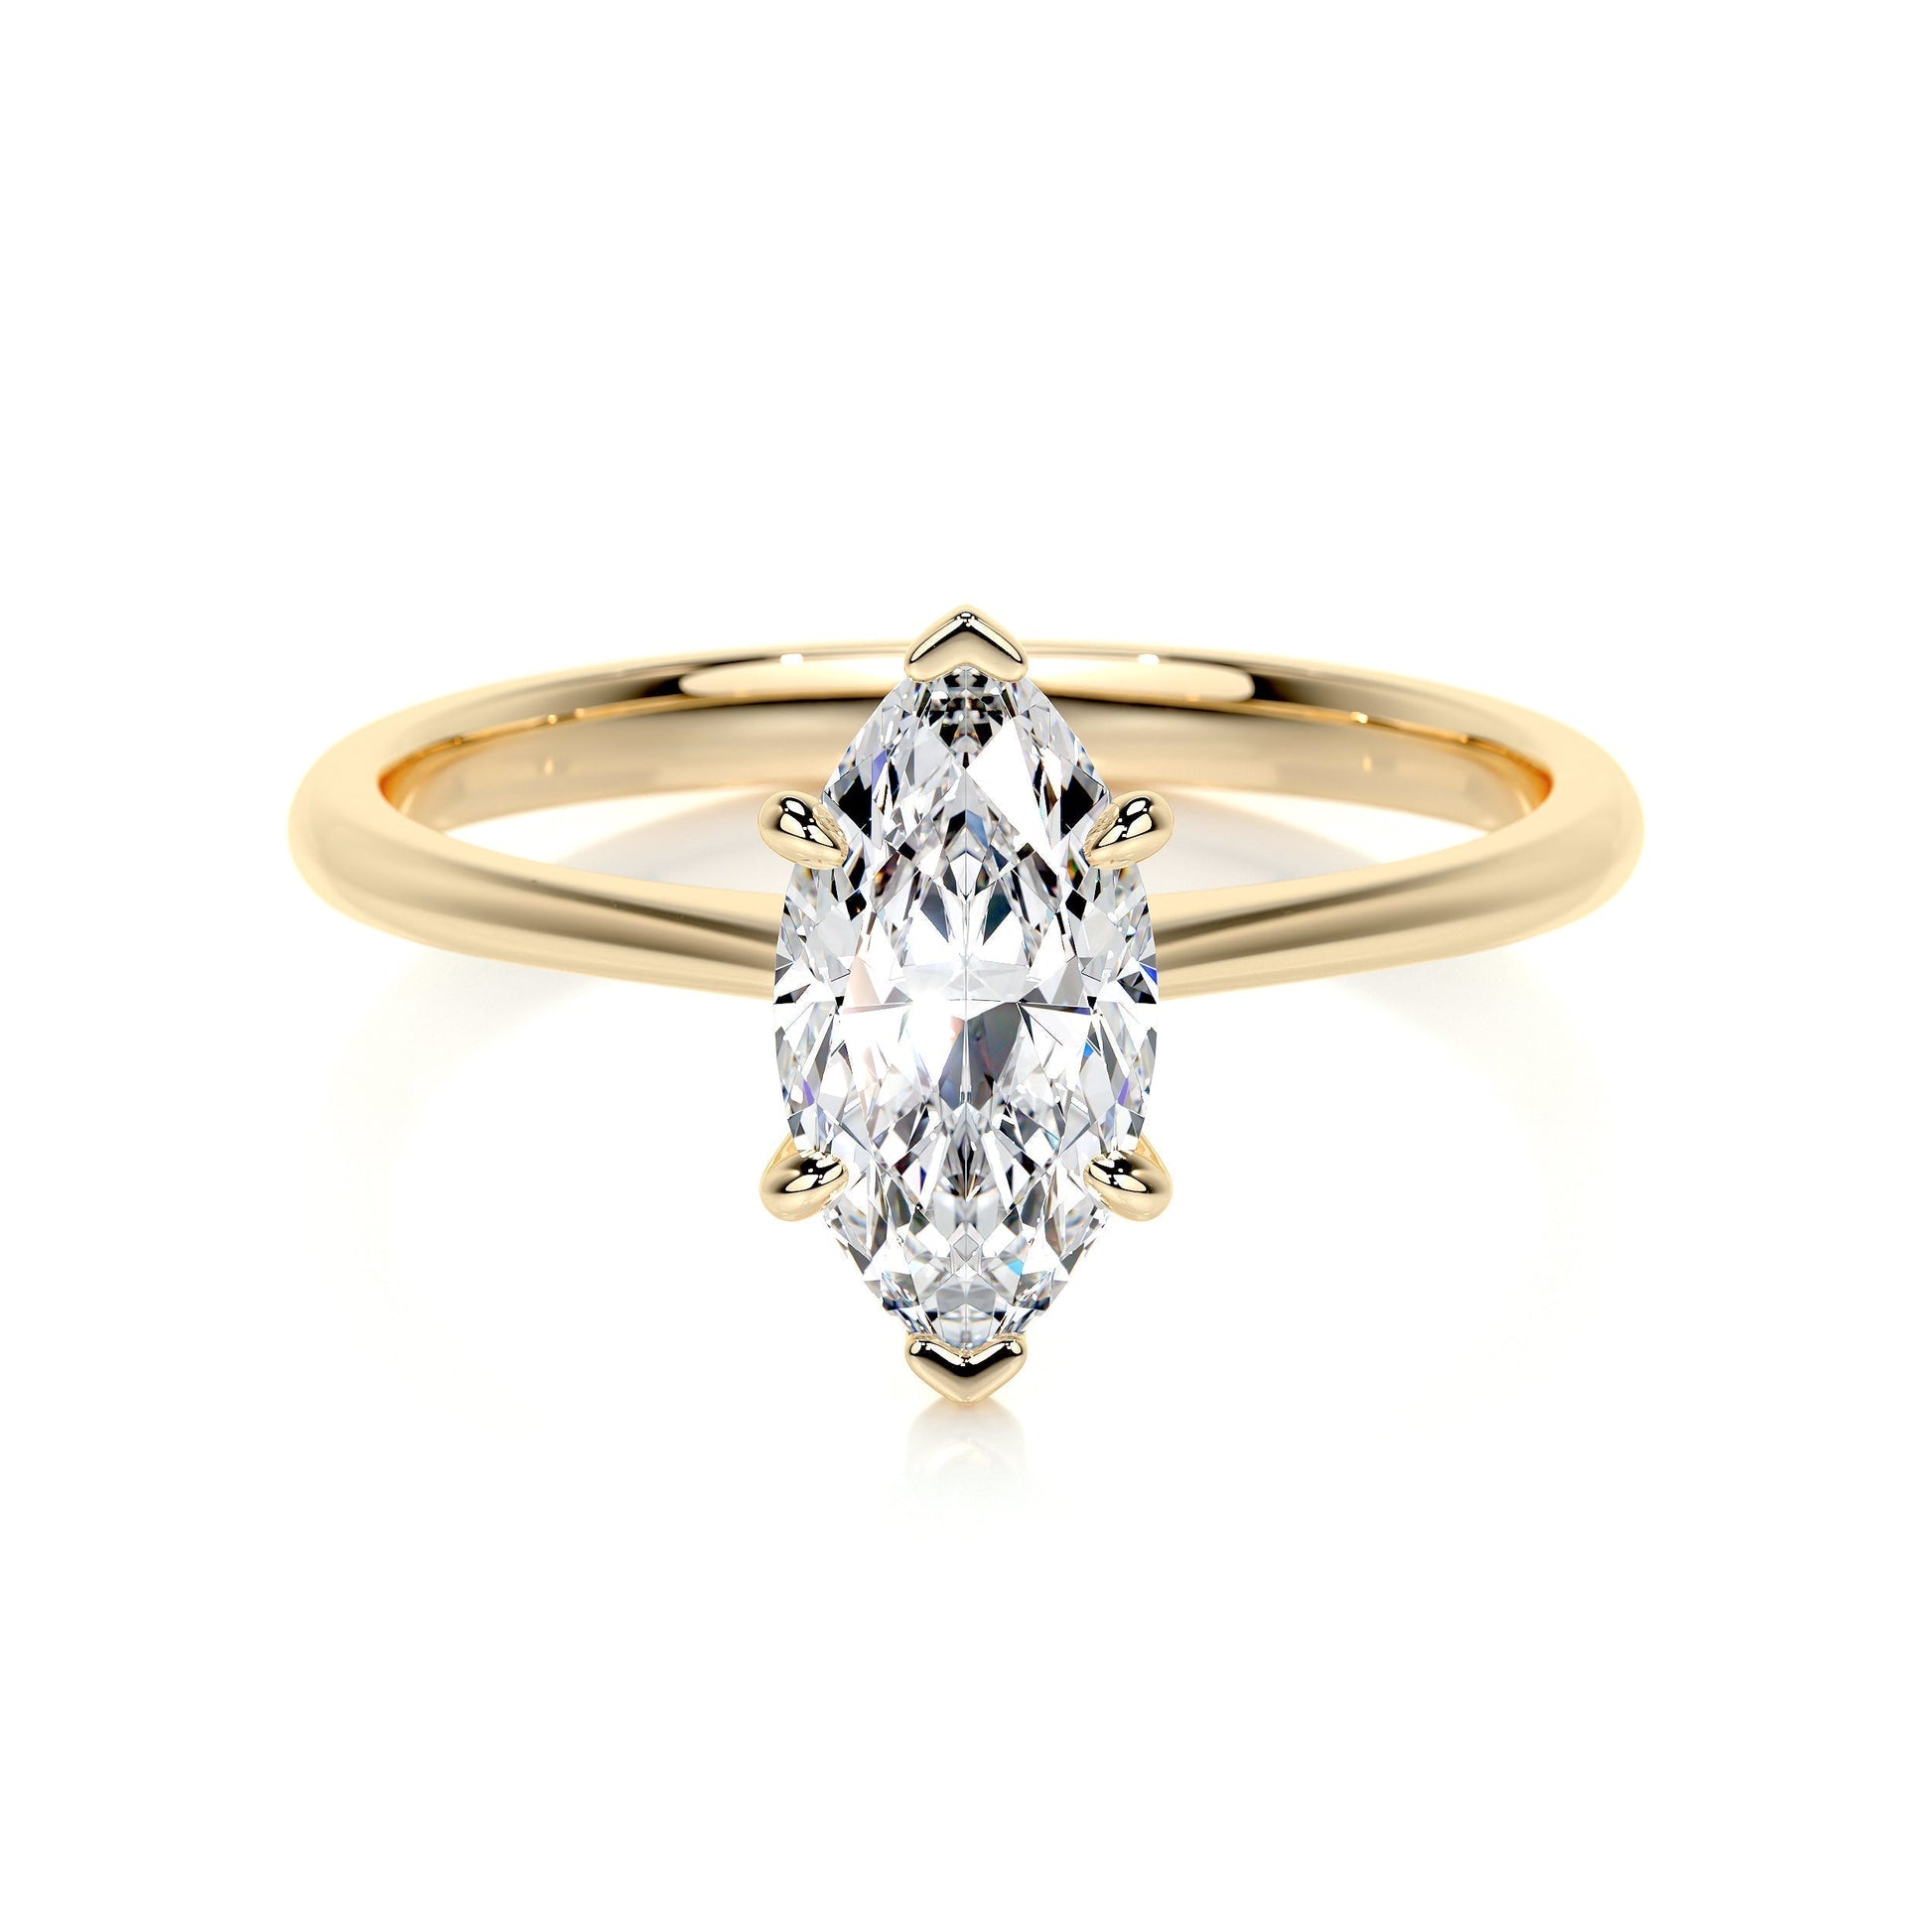 1.0 CT Marquise Solitaire CVD F/VS2 Diamond Engagement Ring 24